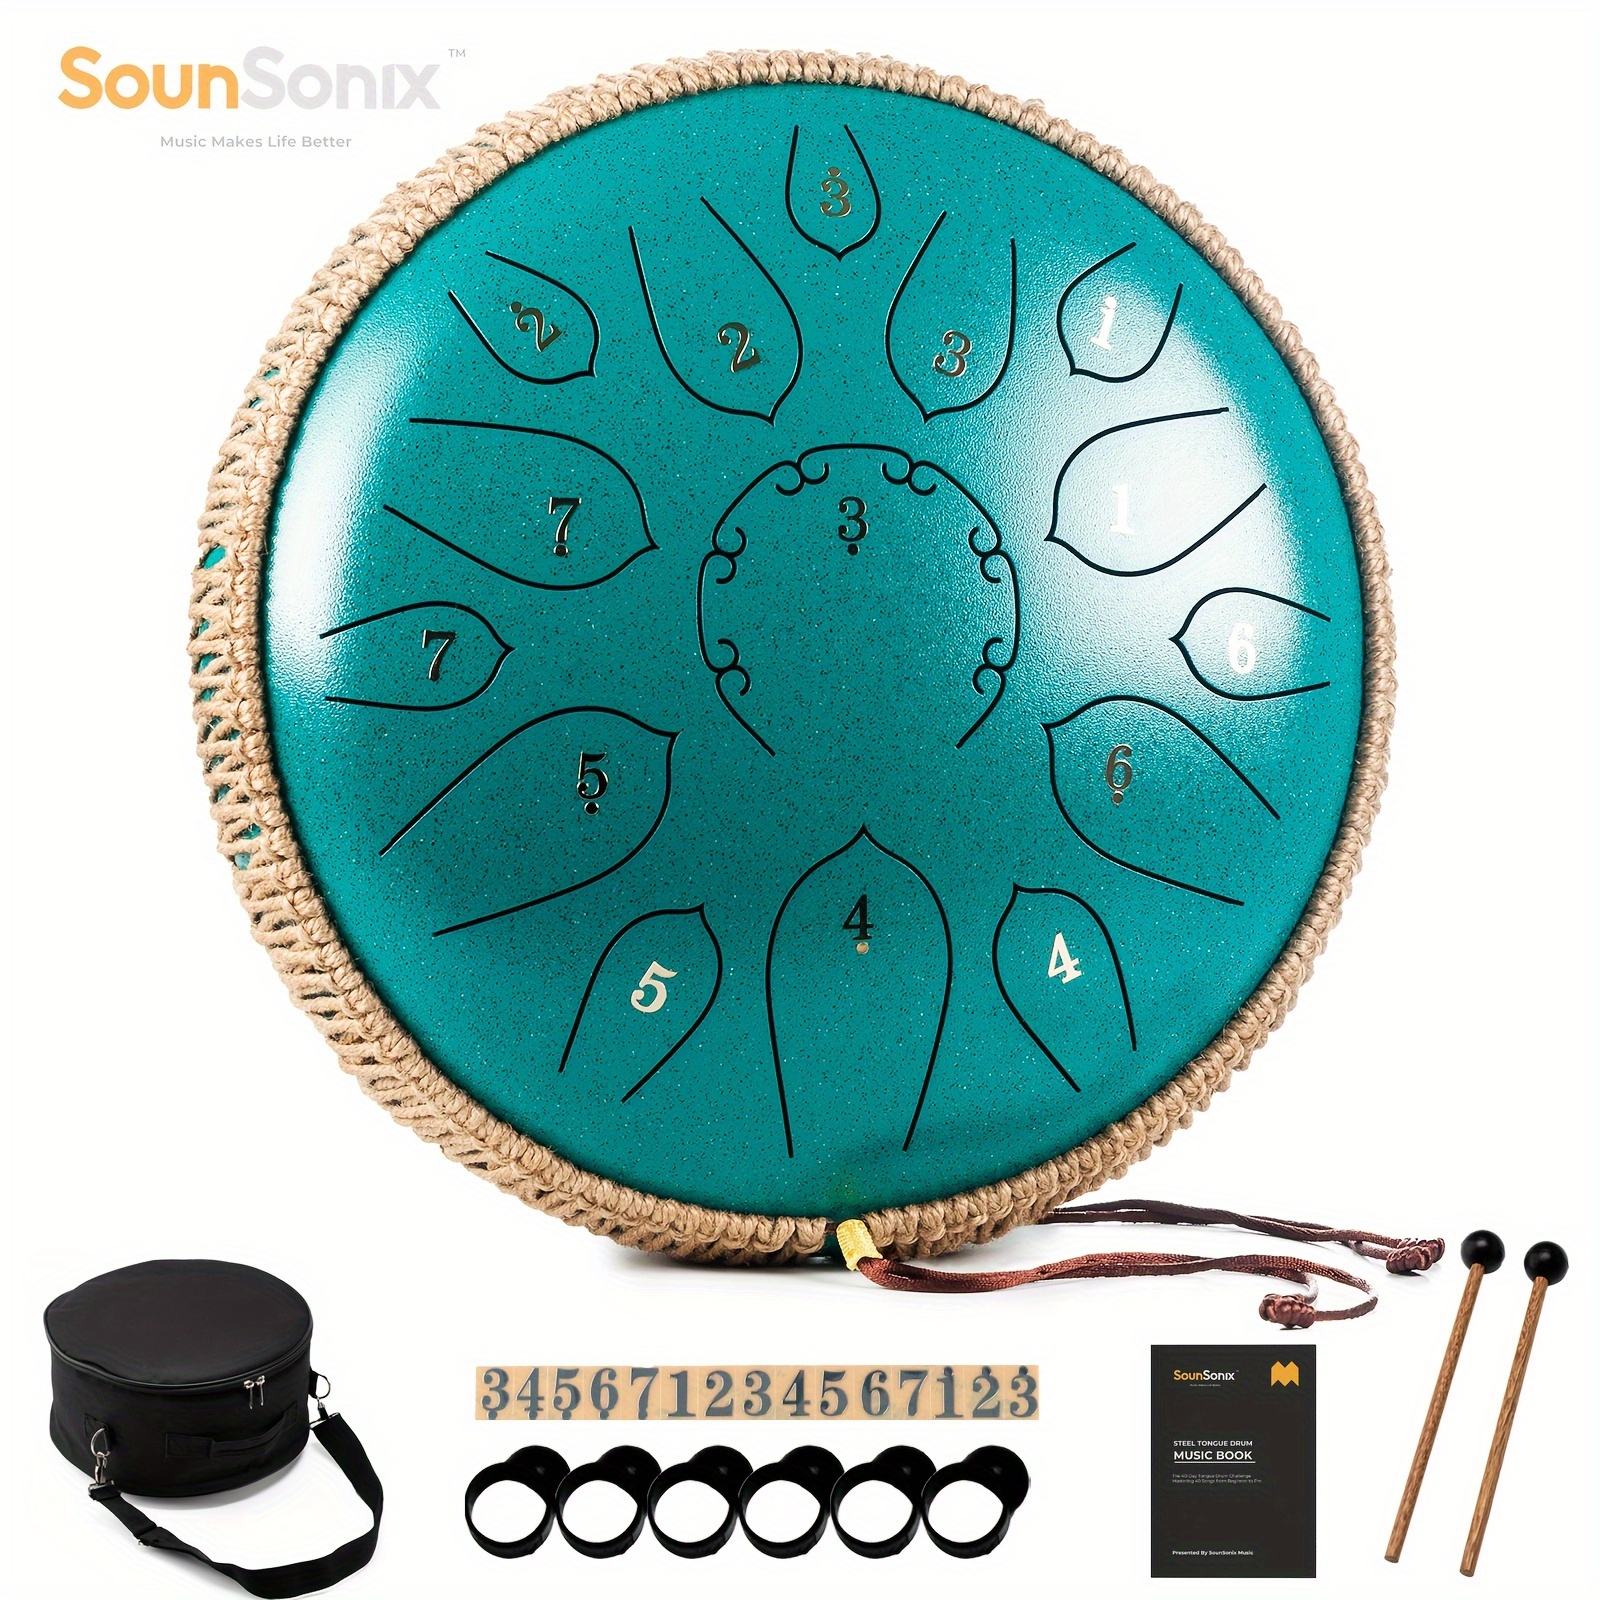 Steel Tongue Drum Panda Drum,12 Inch 13 Note Tank drum percussion  instrument,C Key Handpan Drum with Drum Mallets Carry Bag,Beautifully  Designed and